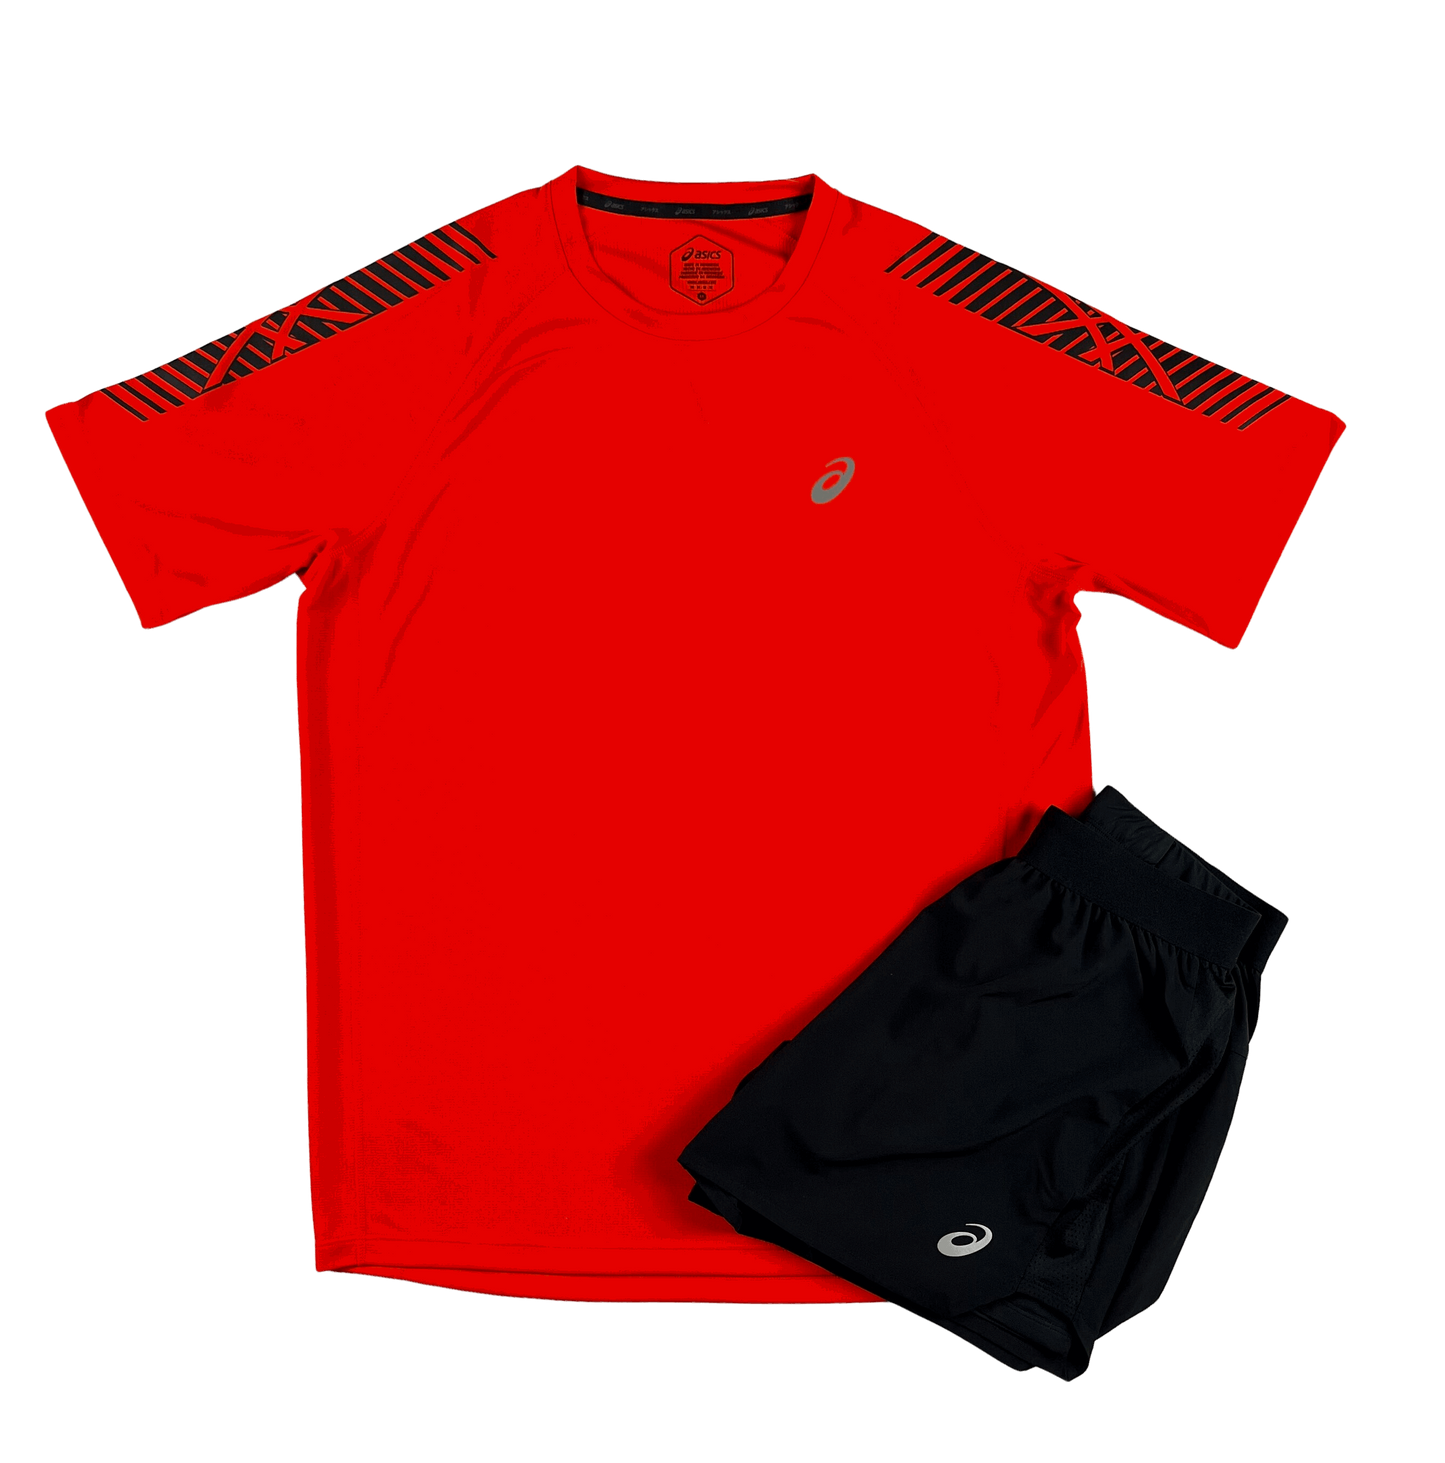 Asics Icon SS T-Shirt and Road Short Set - Red/Black - Active Vault